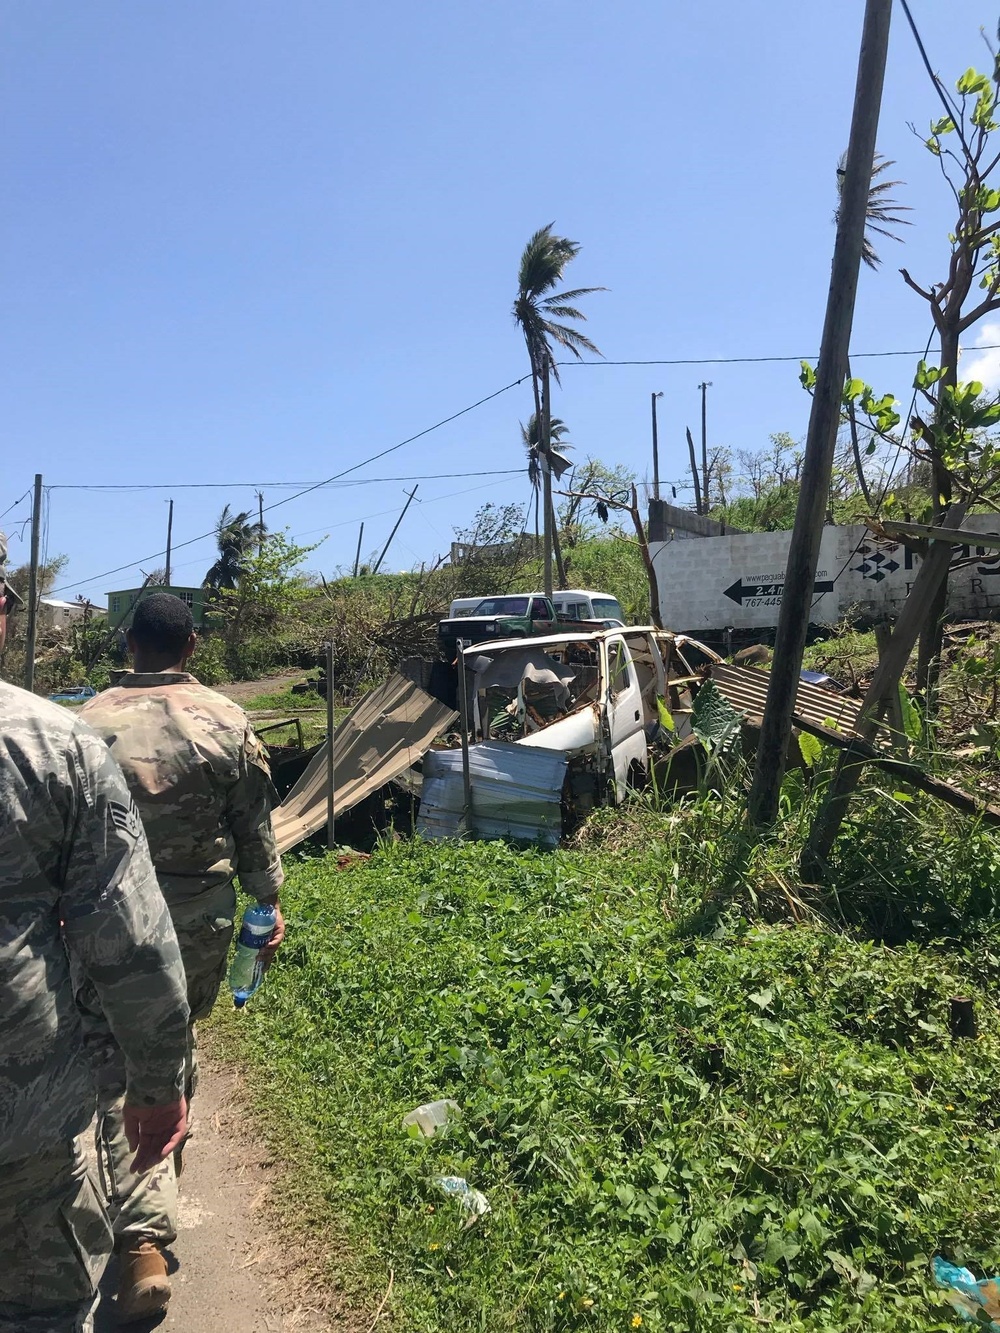 62nd APS lifts cargo, spirits on island of Dominica